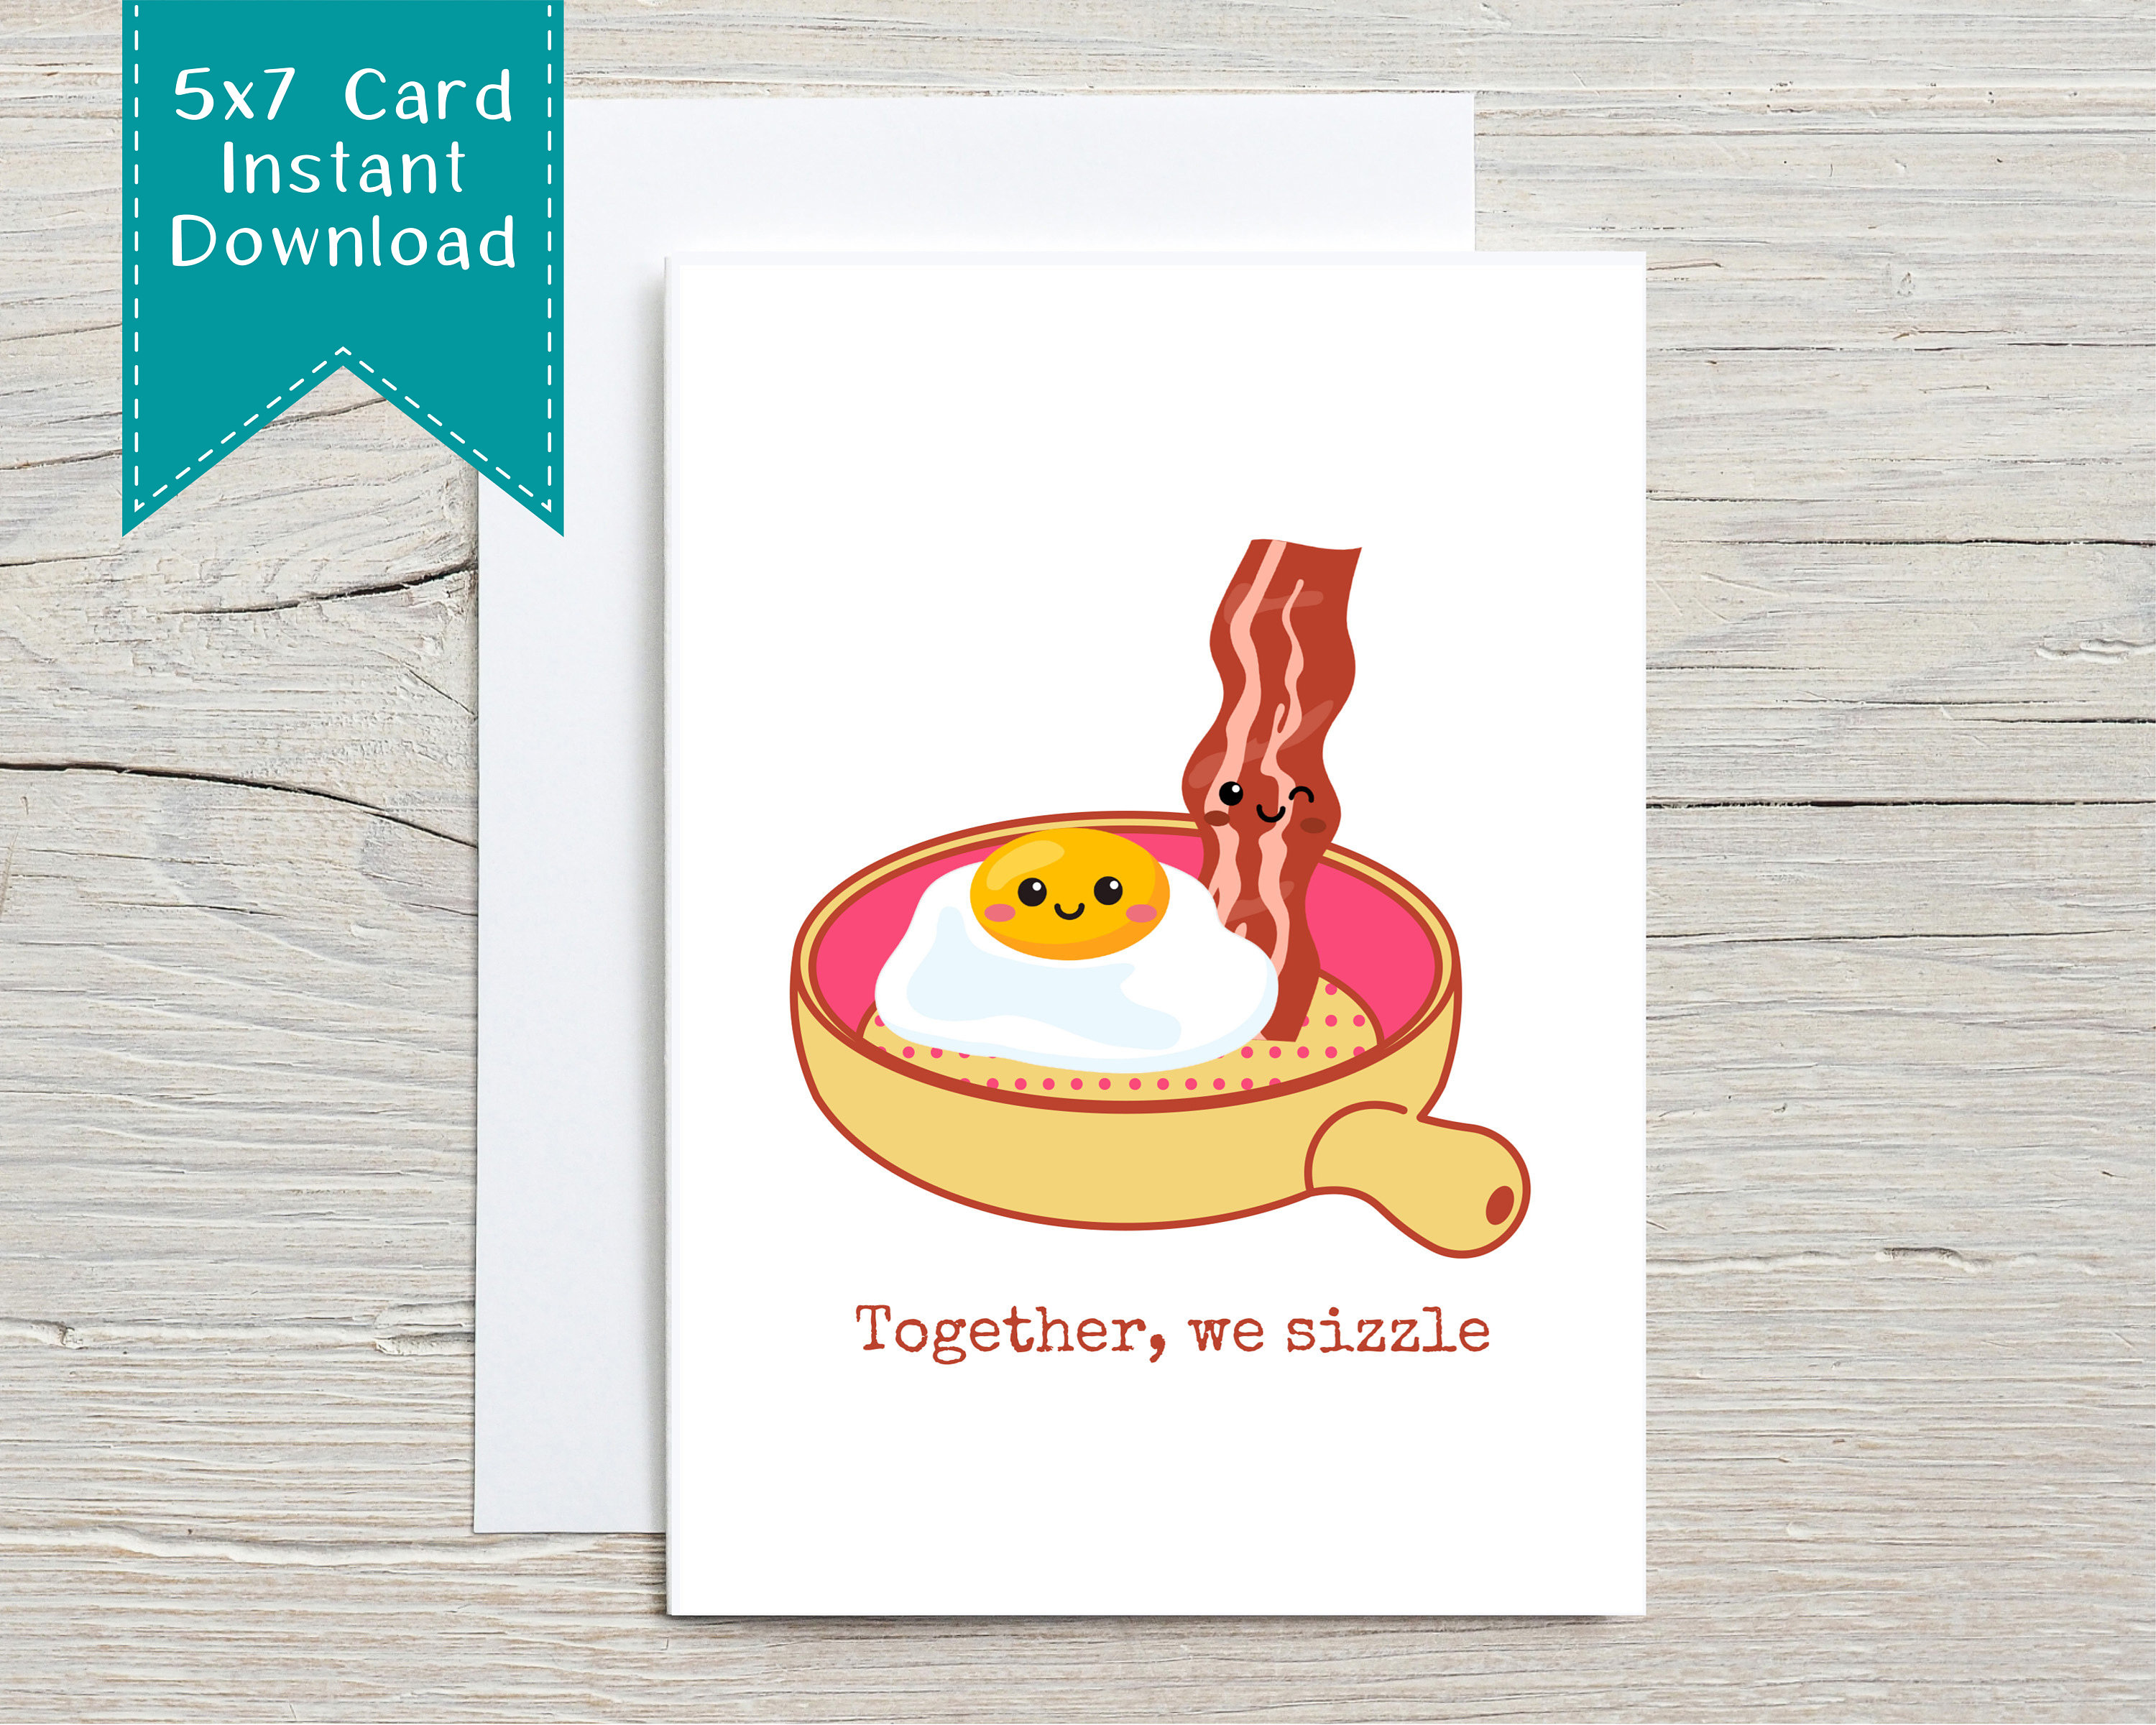 Bacon Christmas Card for Boyfriend Christmas Gifts Greeting Cards